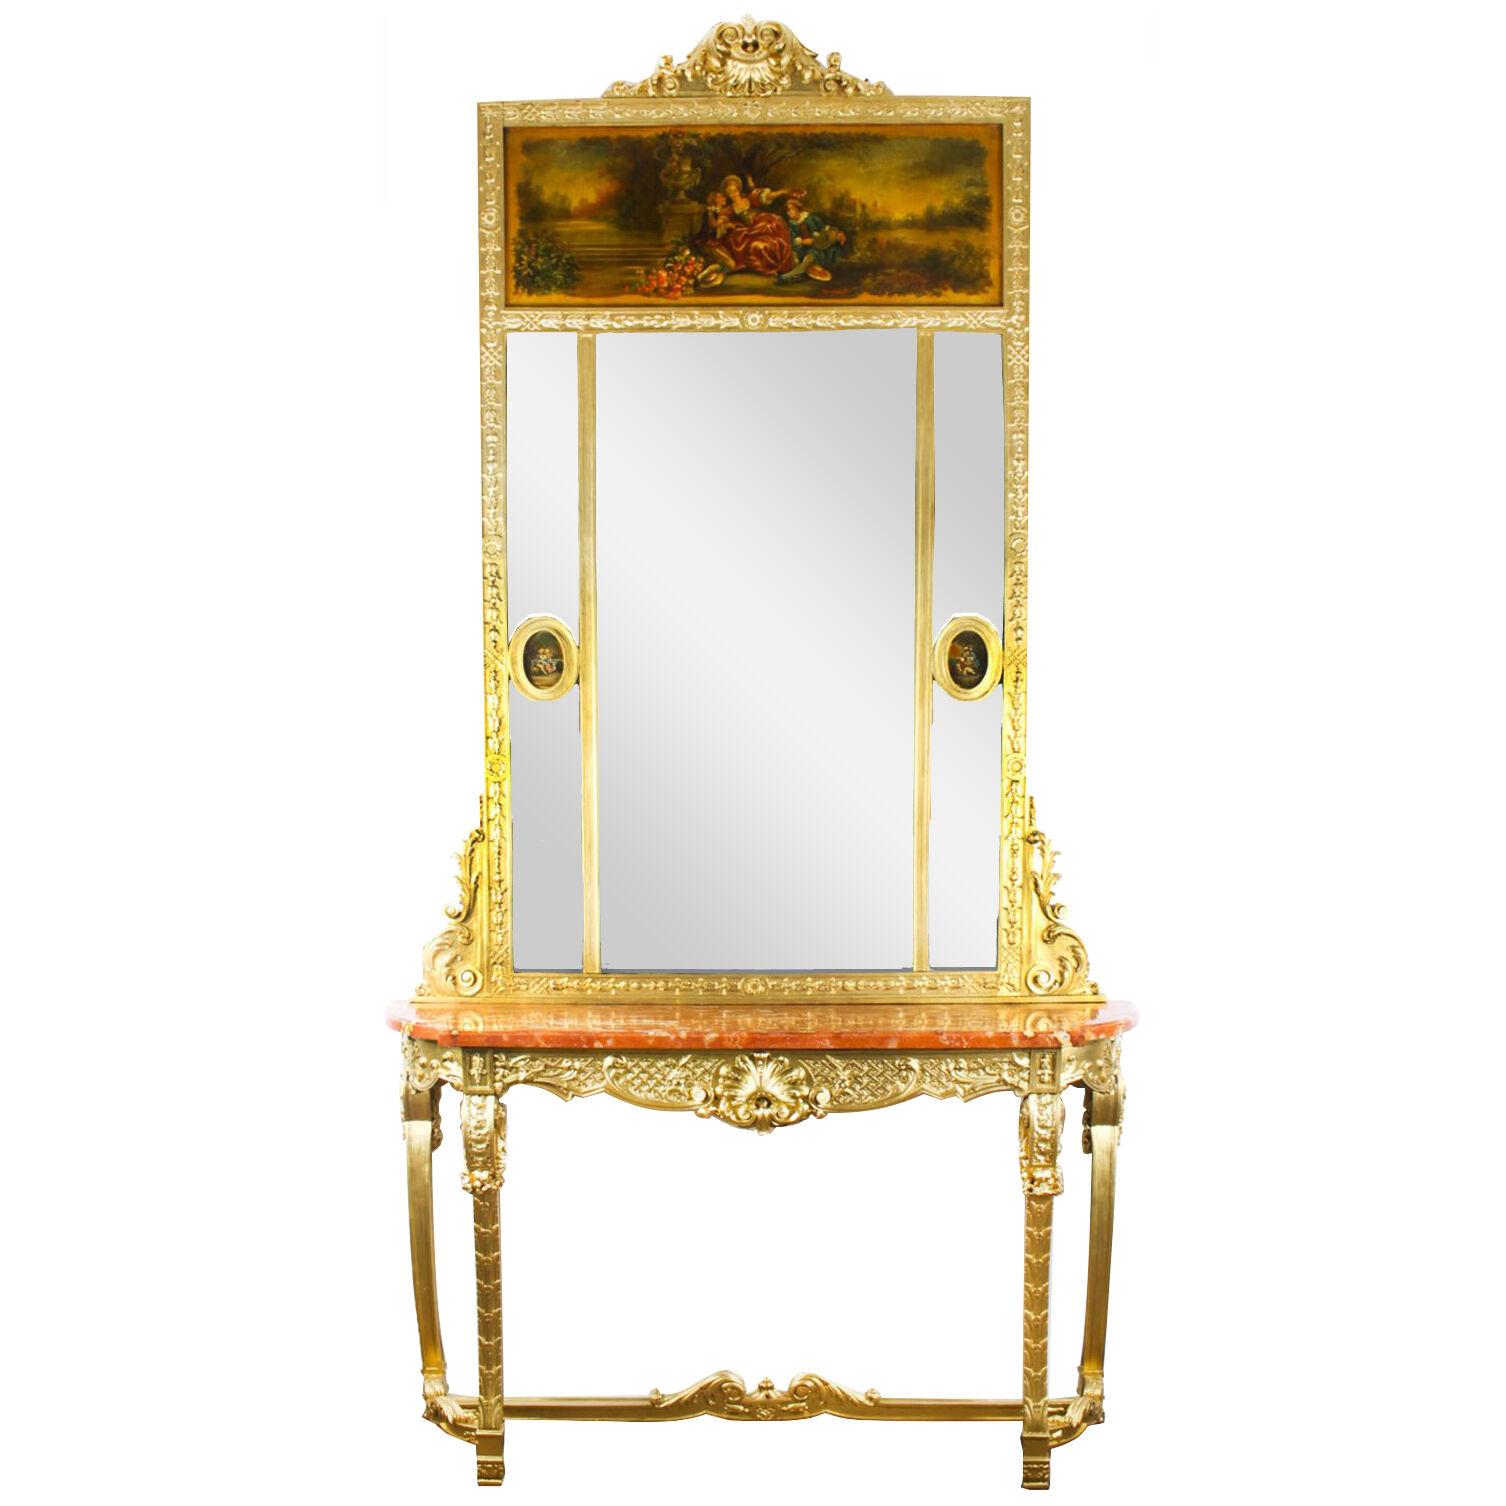 Antique French Trumeau Mirror with matching Console Table C1820 19th C